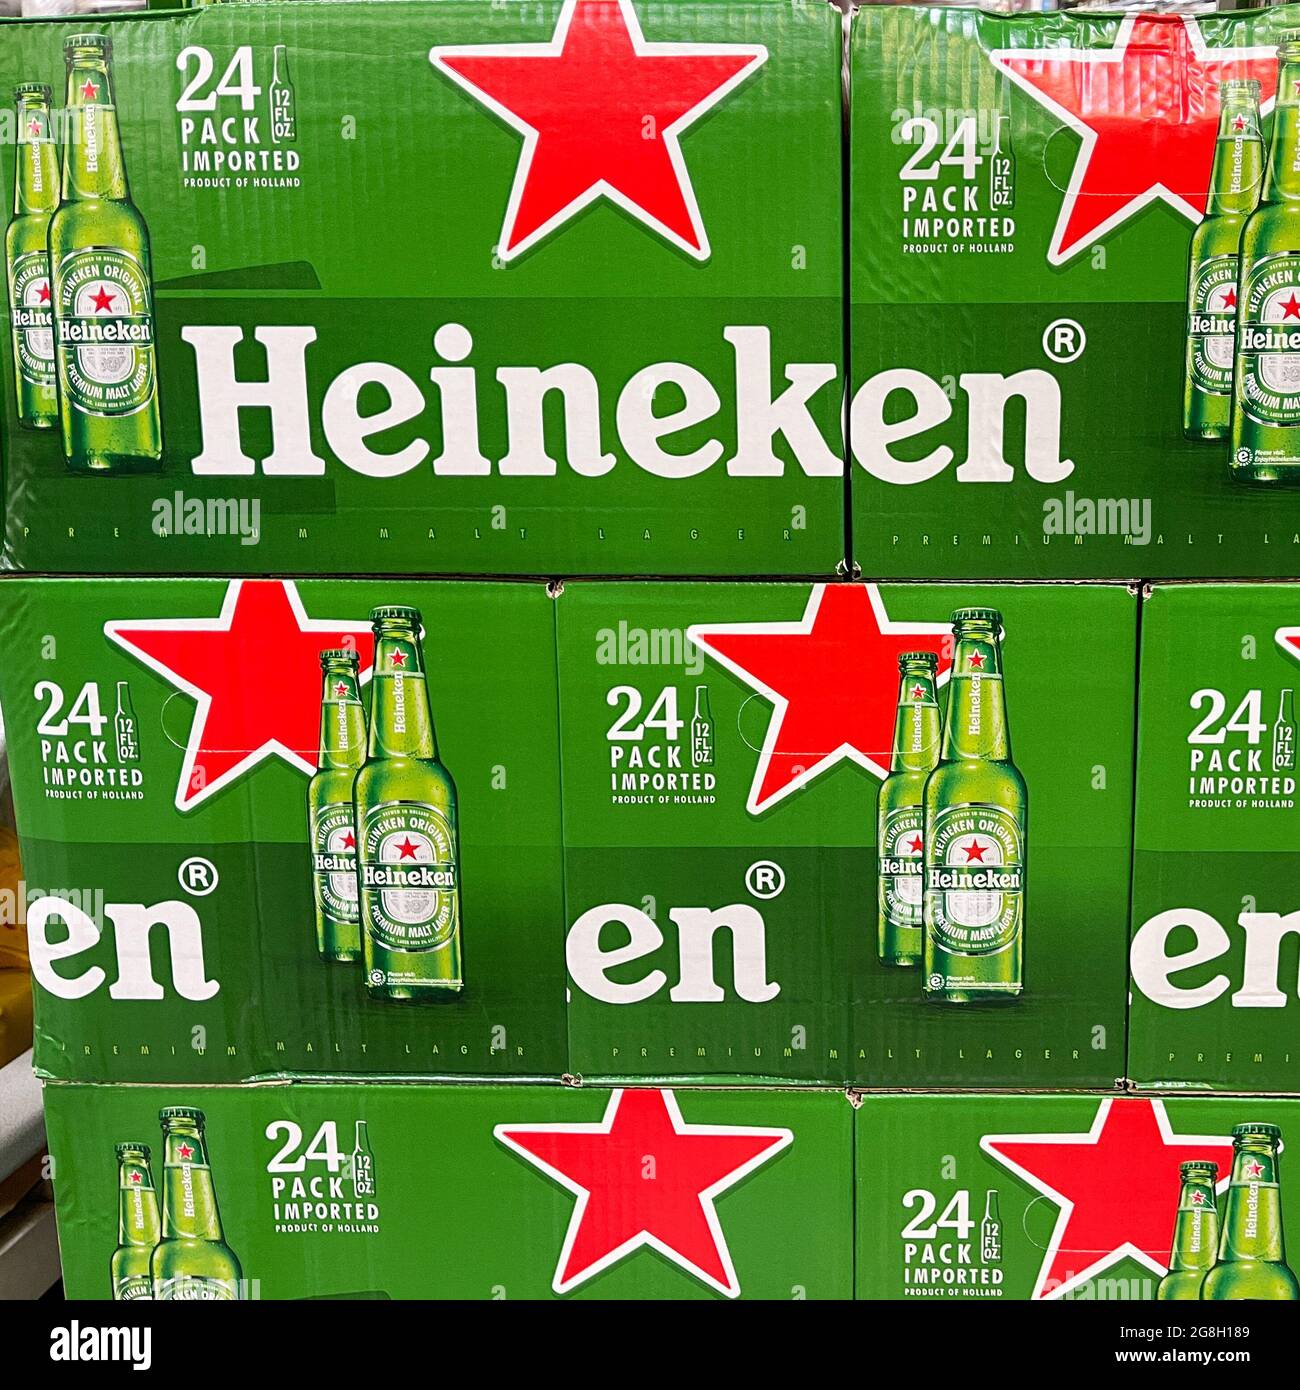 Orlando, FL USA - July 18, 2021: Cases of Heineken Bottle Beer at a grocery  store waiting for customers to purchase. Heineken is a product of Holland  Stock Photo - Alamy